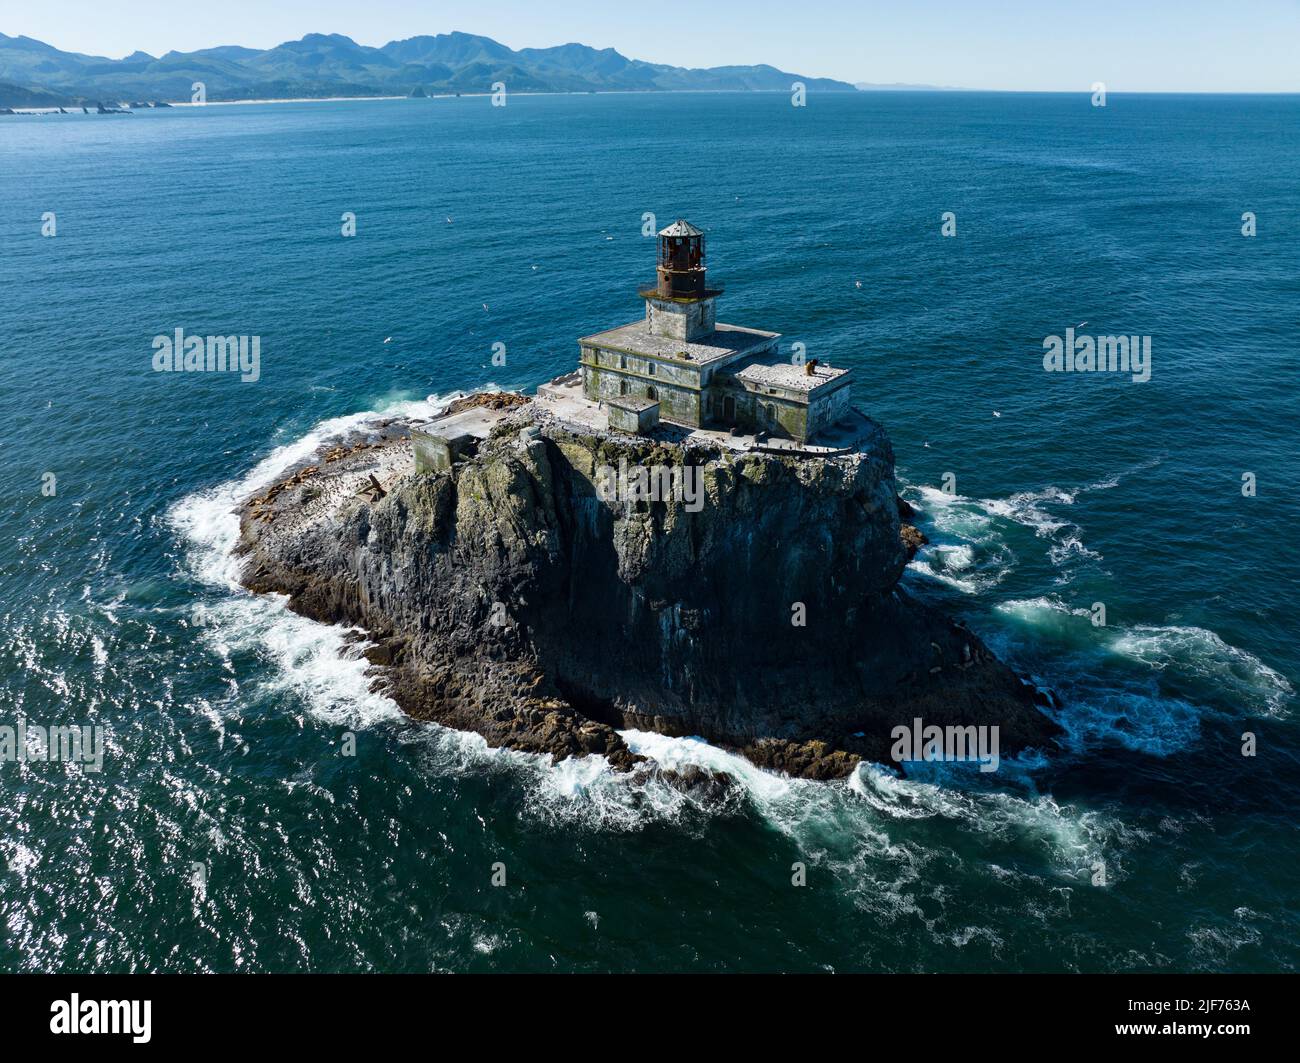 The cold water of the Pacific Ocean surrounds the historic, deactivated Tillamook Rock Lighthouse off the scenic Oregon coast. Stock Photo